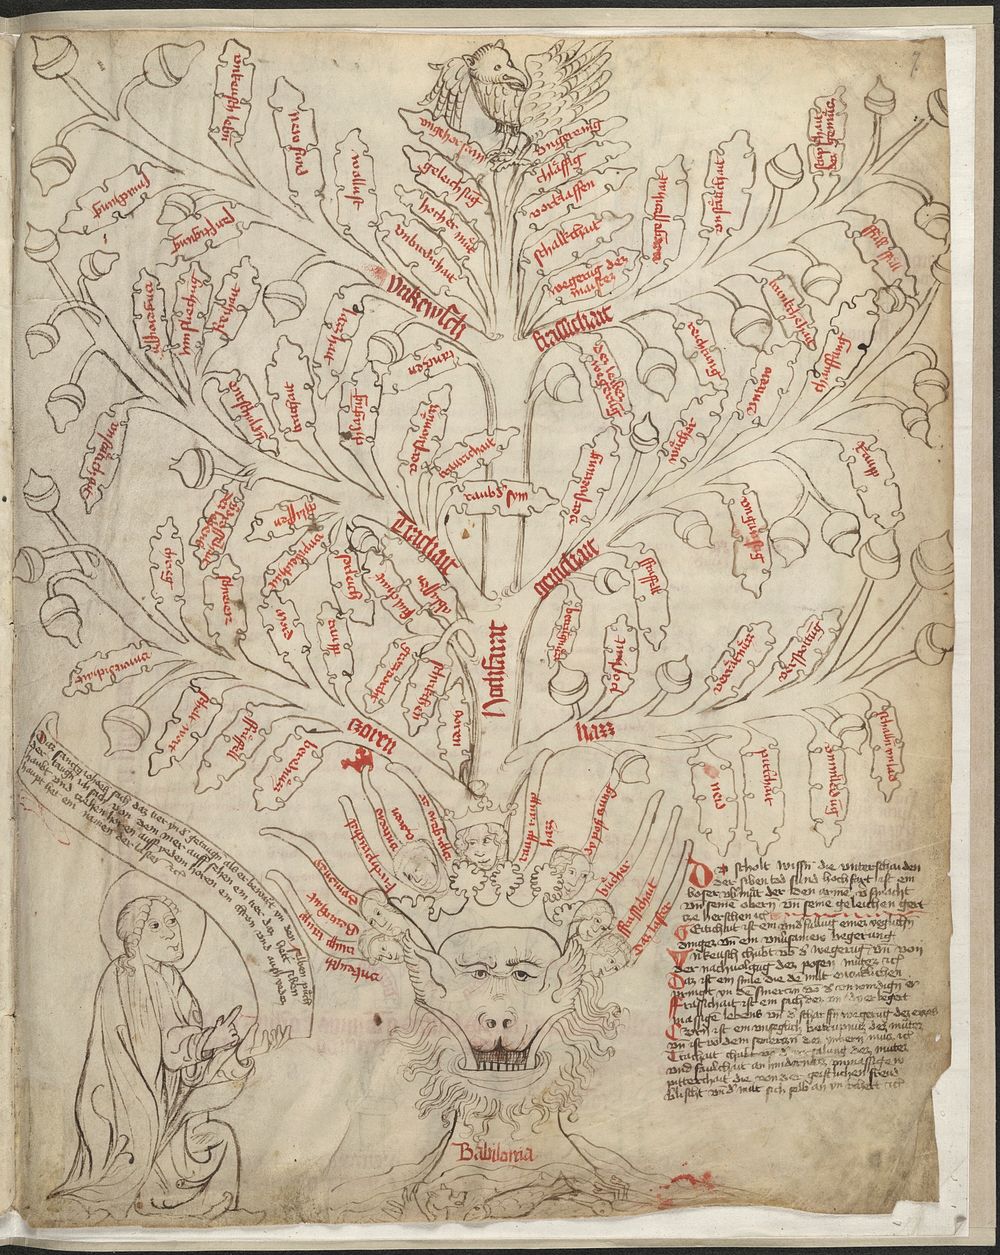 [Encyclopedic manuscript containing allegorical and medical drawings].